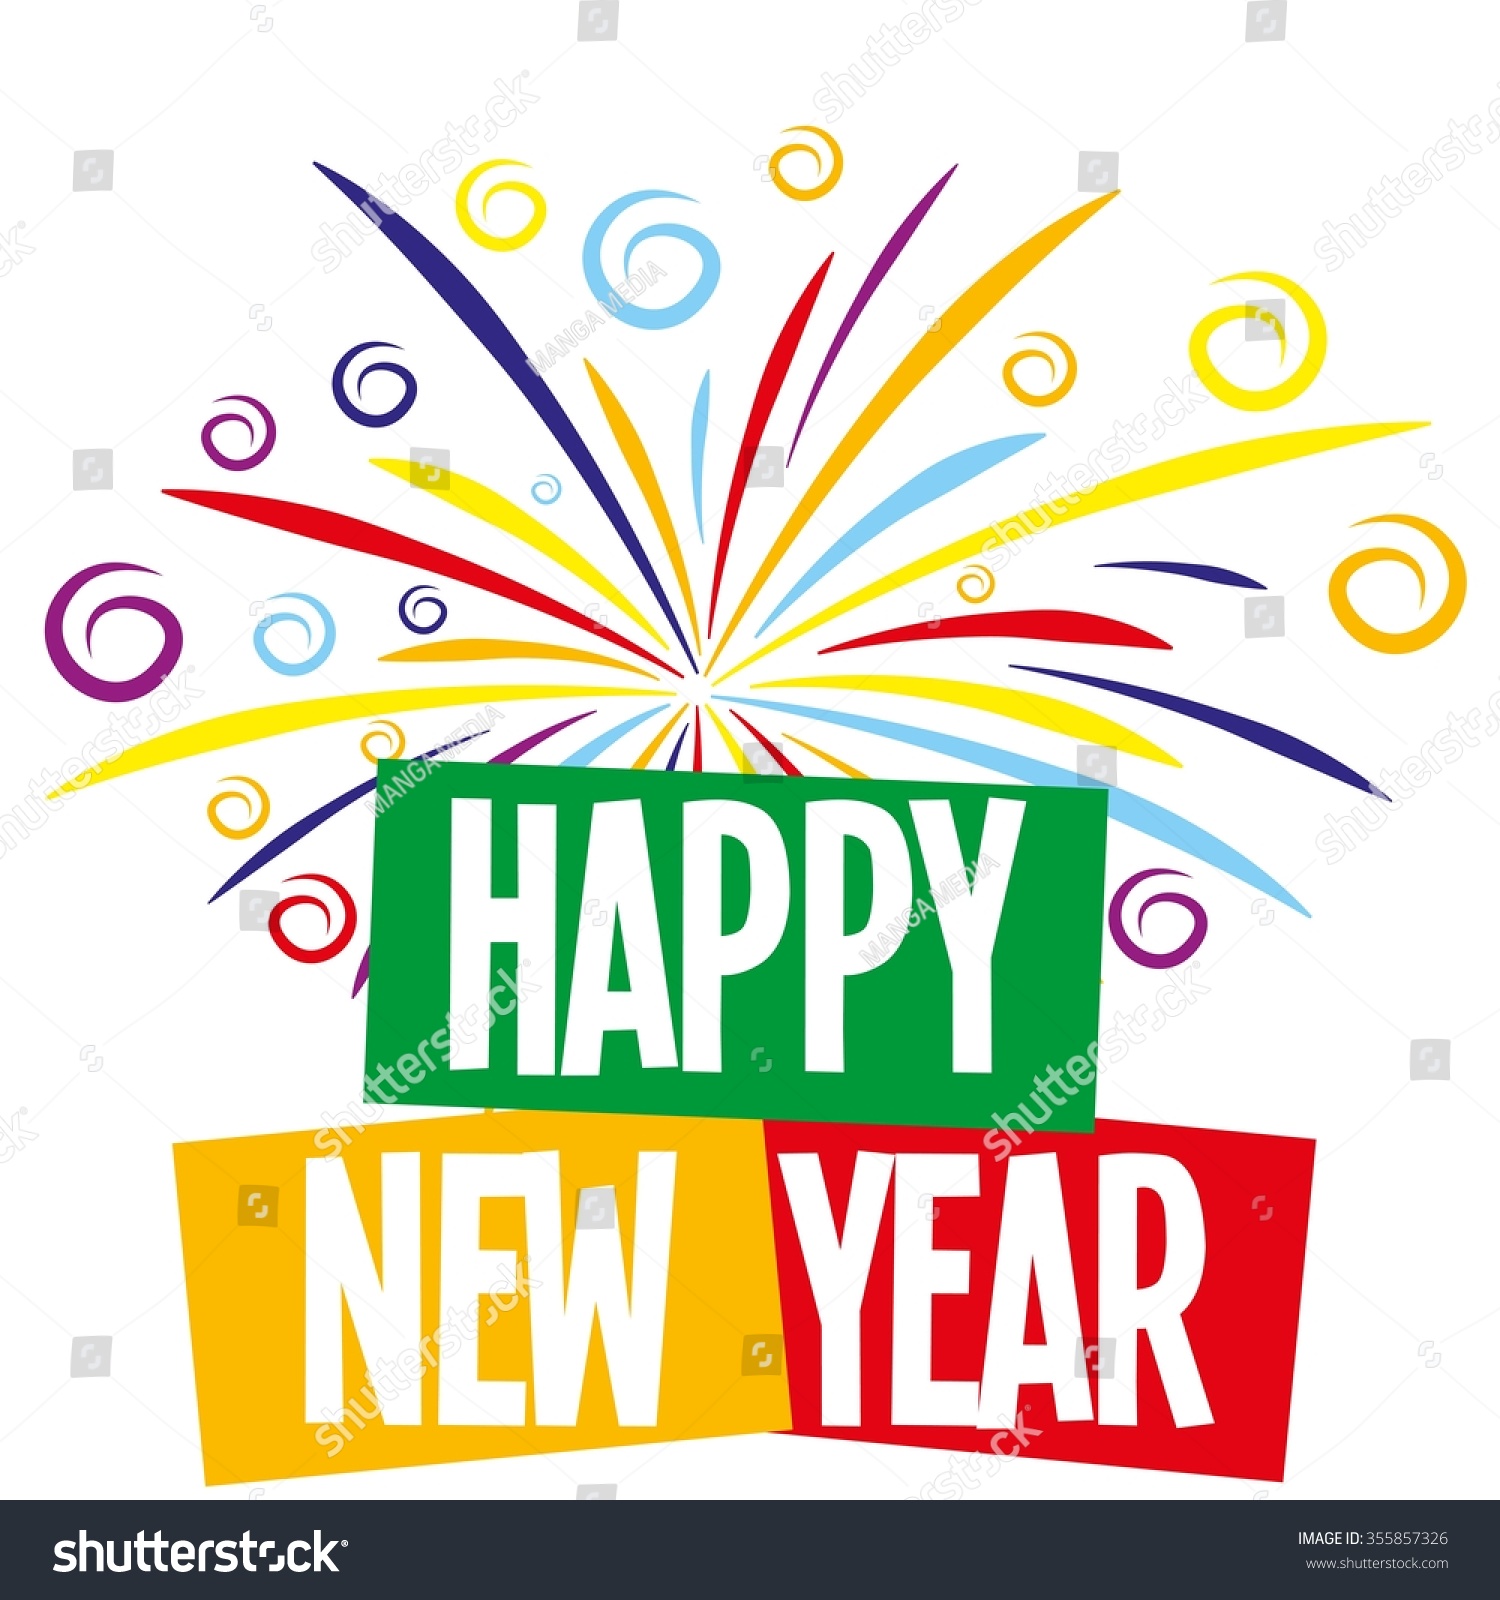 Happy New Year Celebration Banner Colorful Stock Vector ...